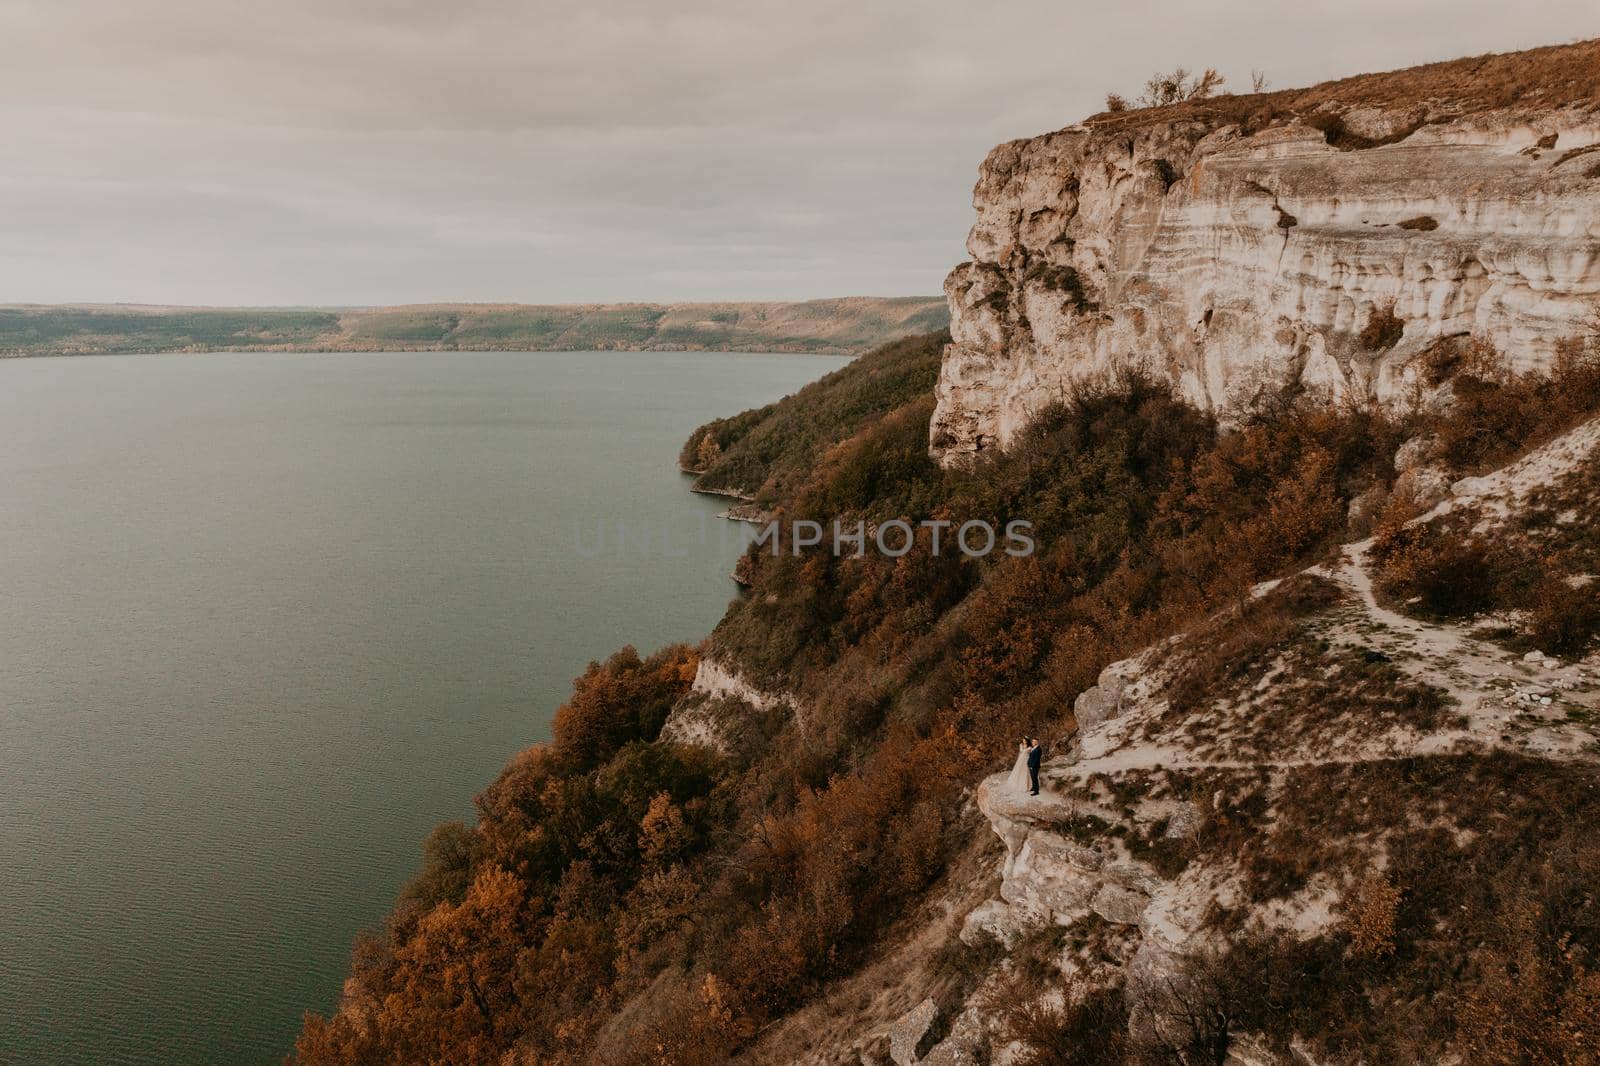 groom in suit and the bride in a dress stand on a stone cliff above the river. Mountain near lake. Aerial view from drone. rock monastery in bakota